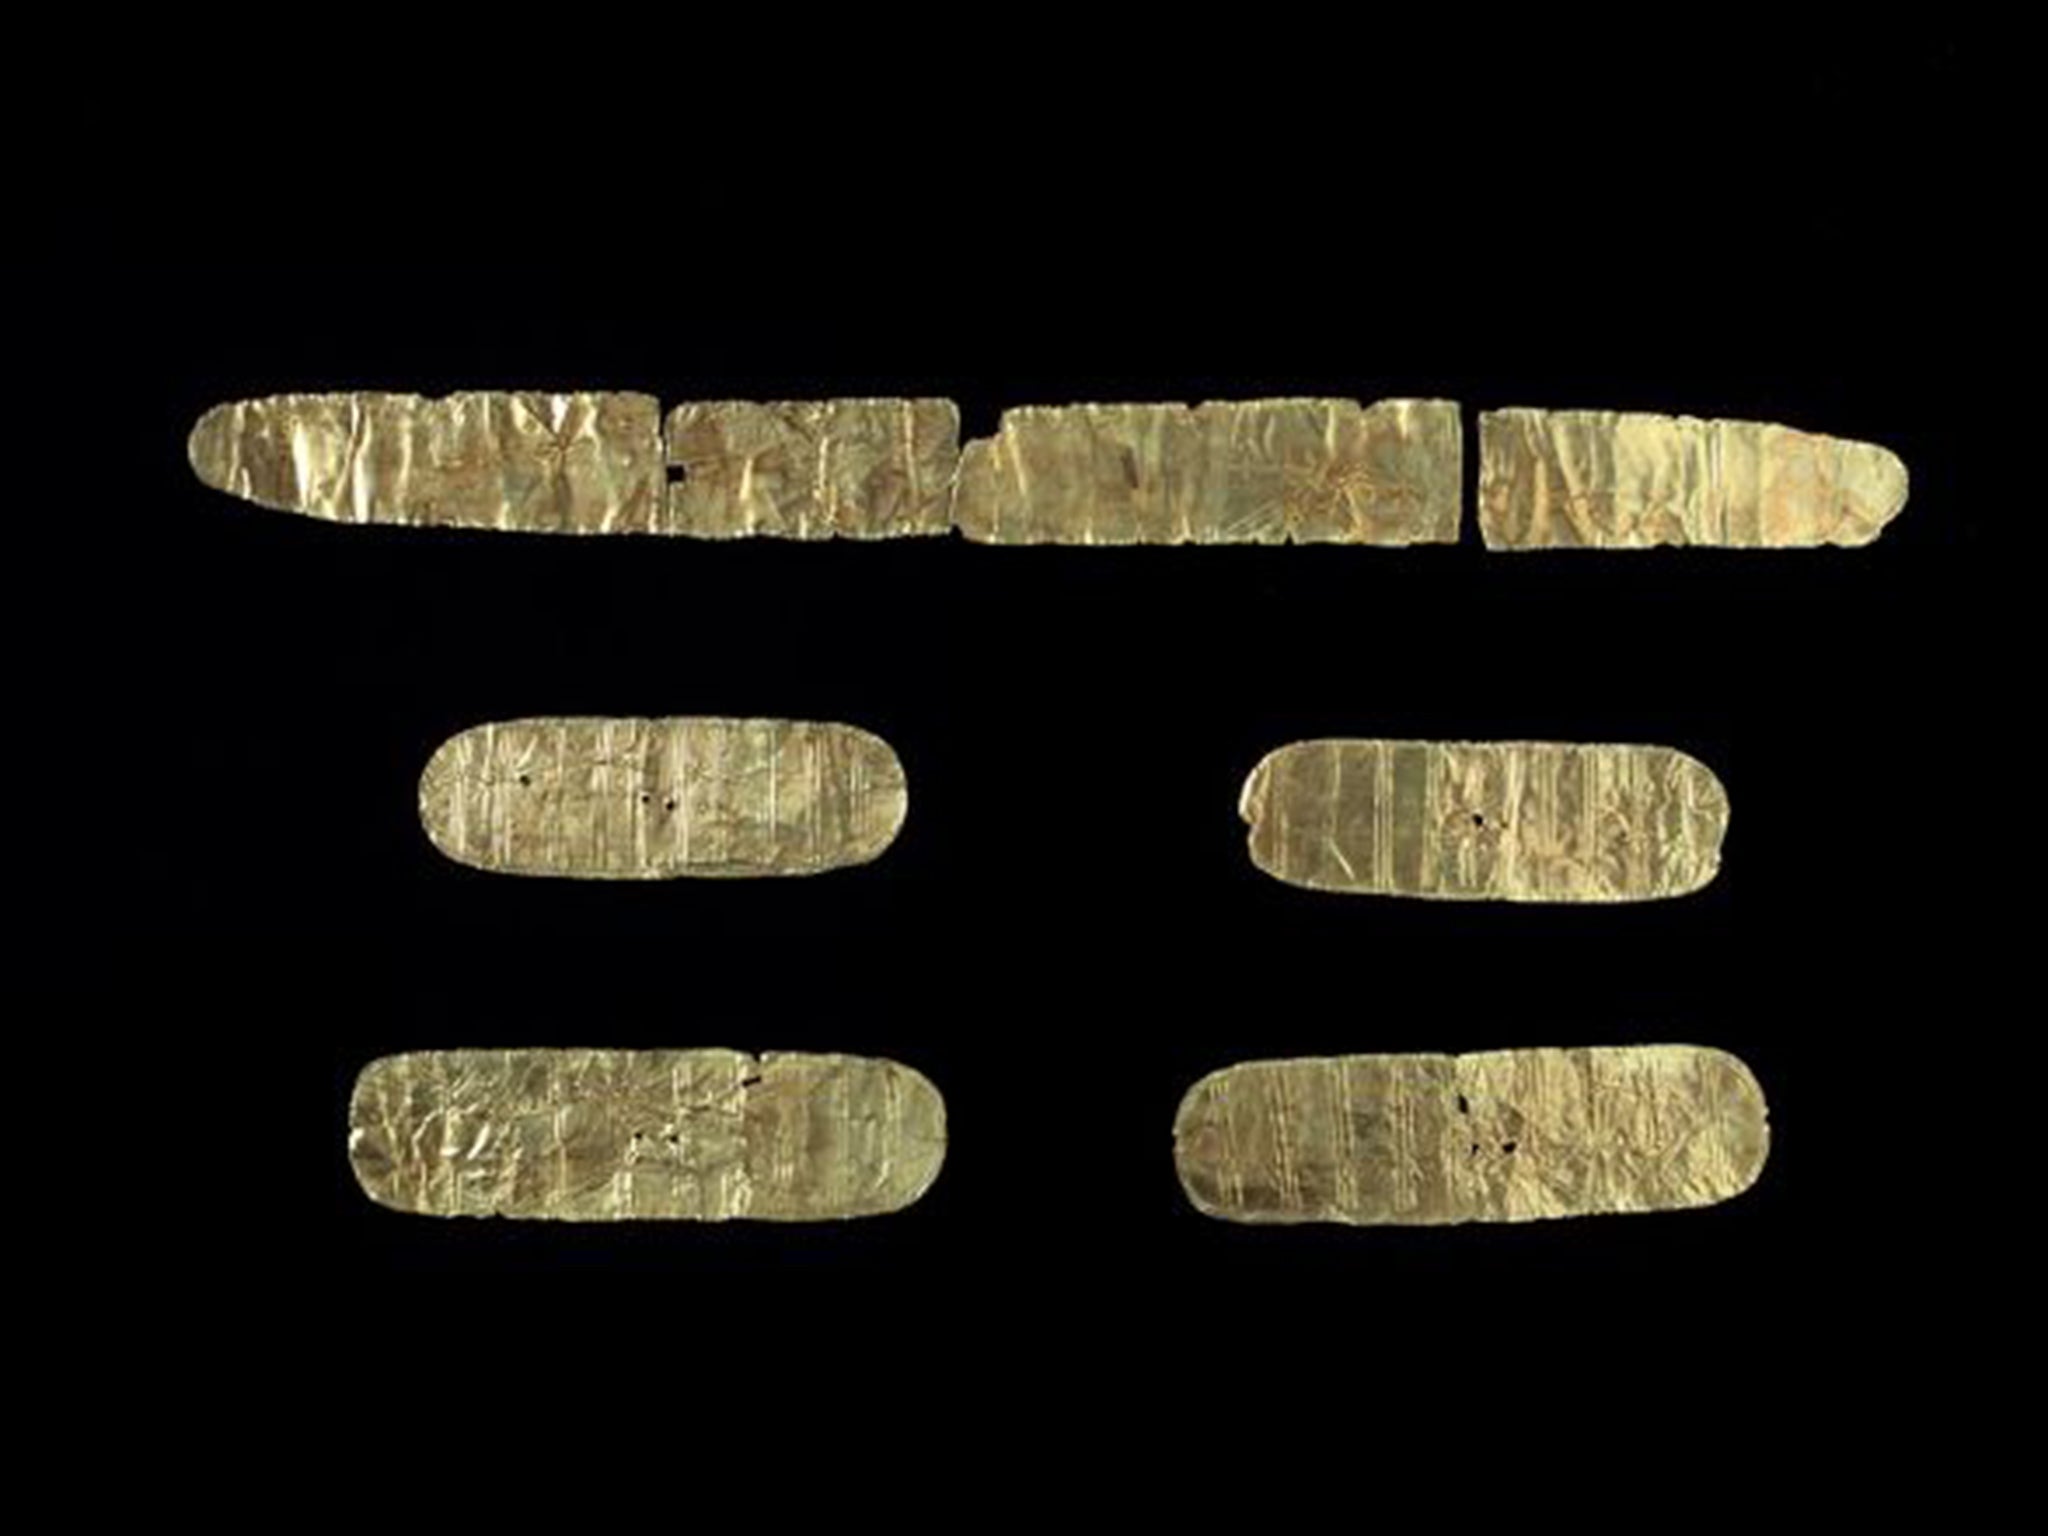 A breast plate, top, and plaques found in Ireland